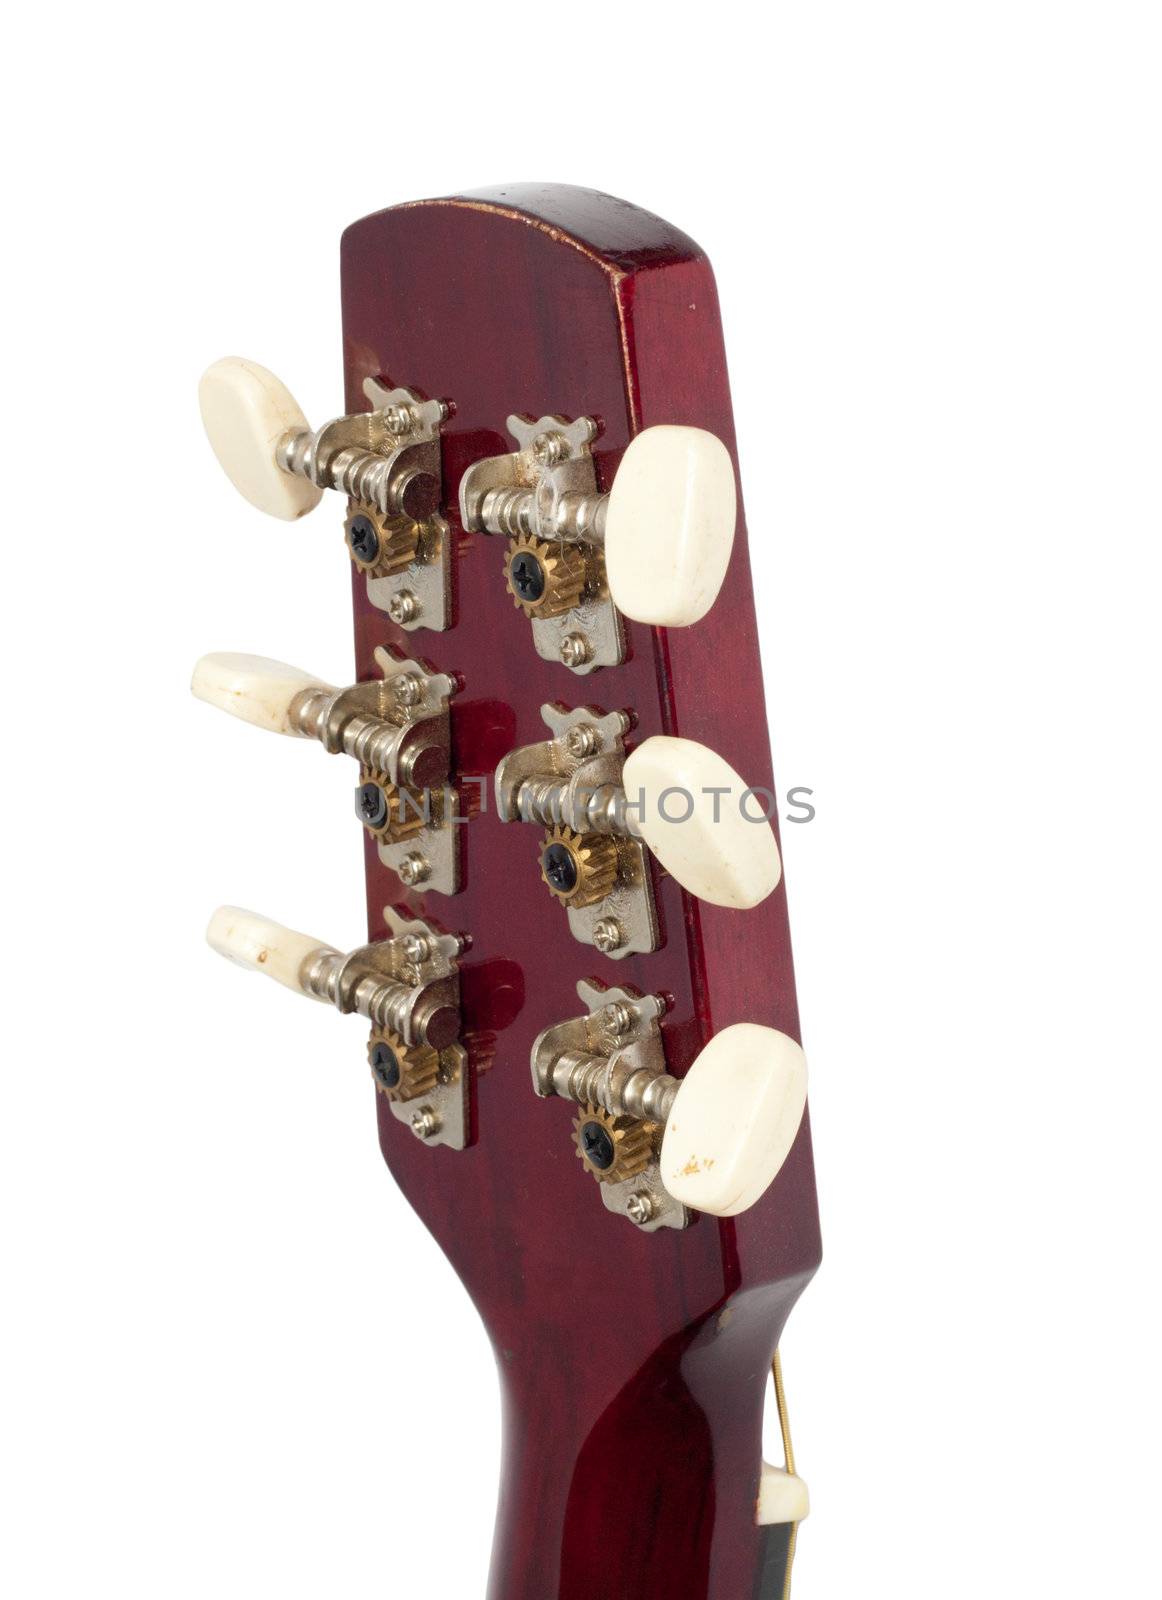 Headstock of the guitar over white background  by schankz